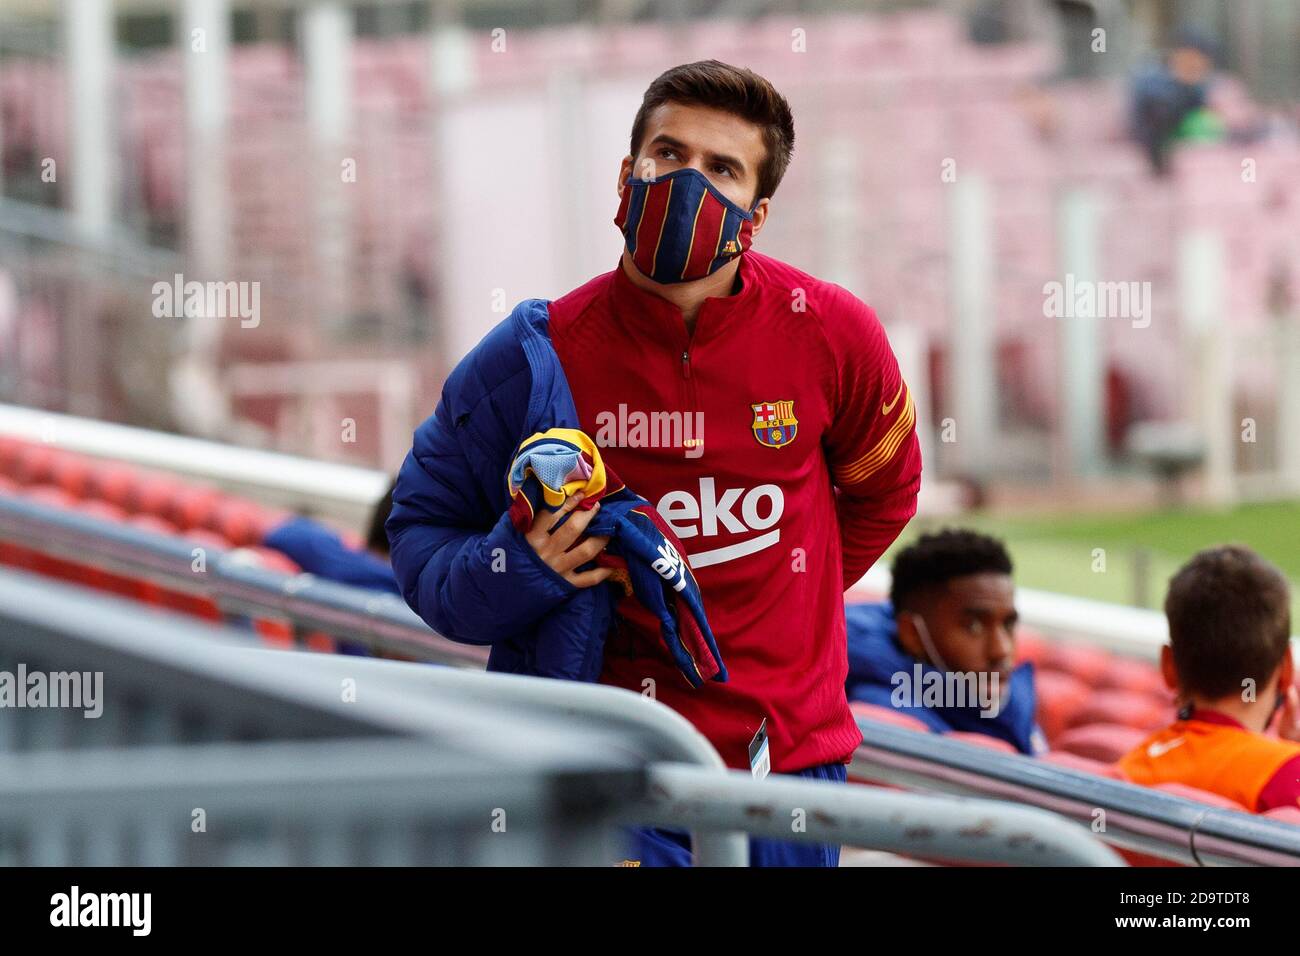 Barcelona, Spain. 07th Nov, 2020. Riqui Puig of FC Barcelona during the Liga Santander match between FC Barcelona and Real Betis Balompie at Camp Nou in Barcelona, Spain. Credit: Dax Images/Alamy Live News Stock Photo